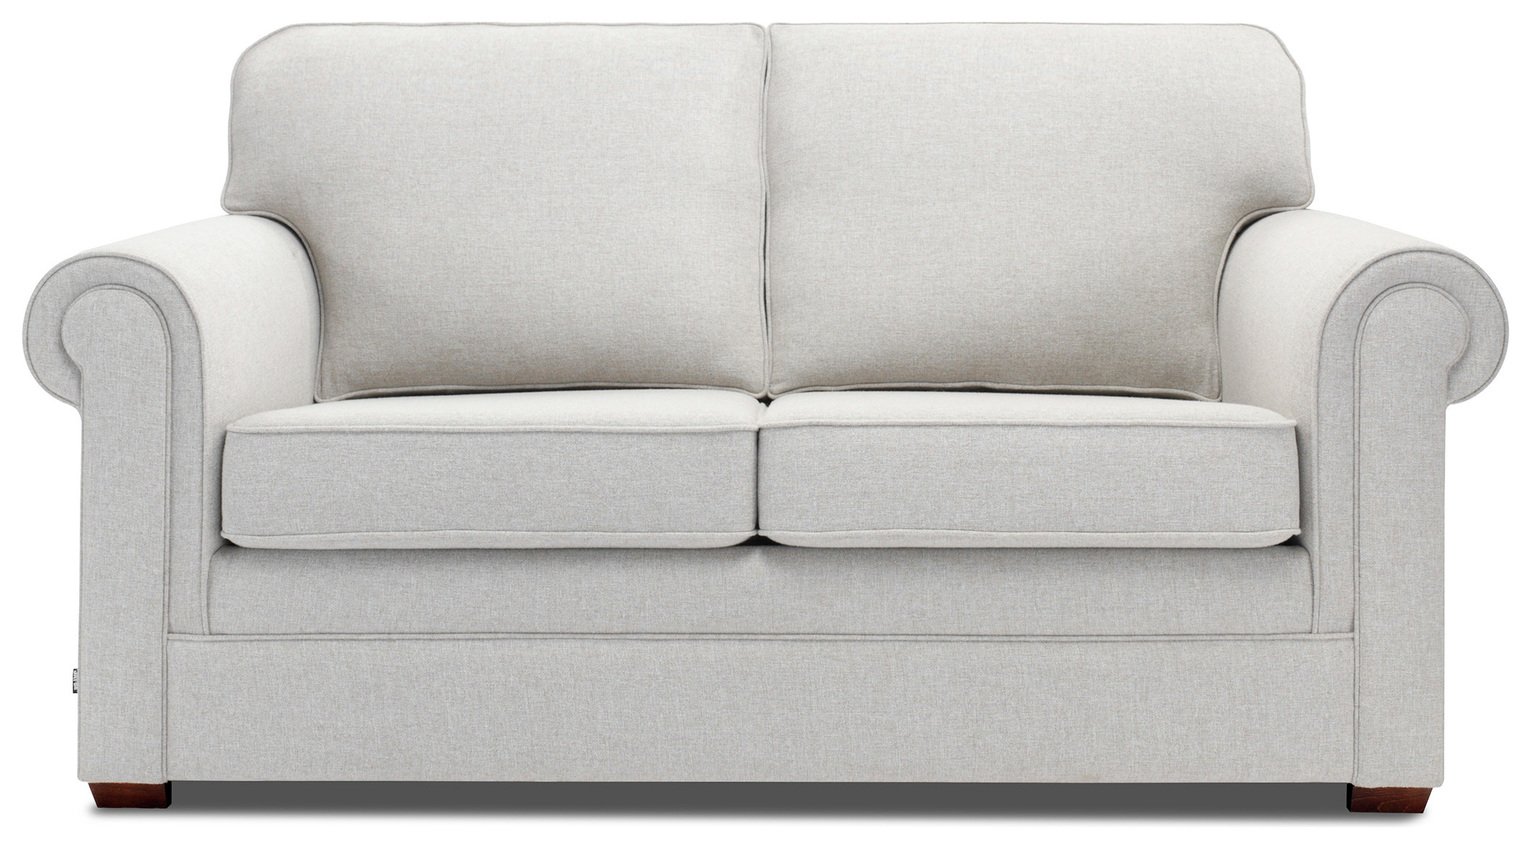 Jay-Be Classic Fabric 2 Seater Sofabed - Silver